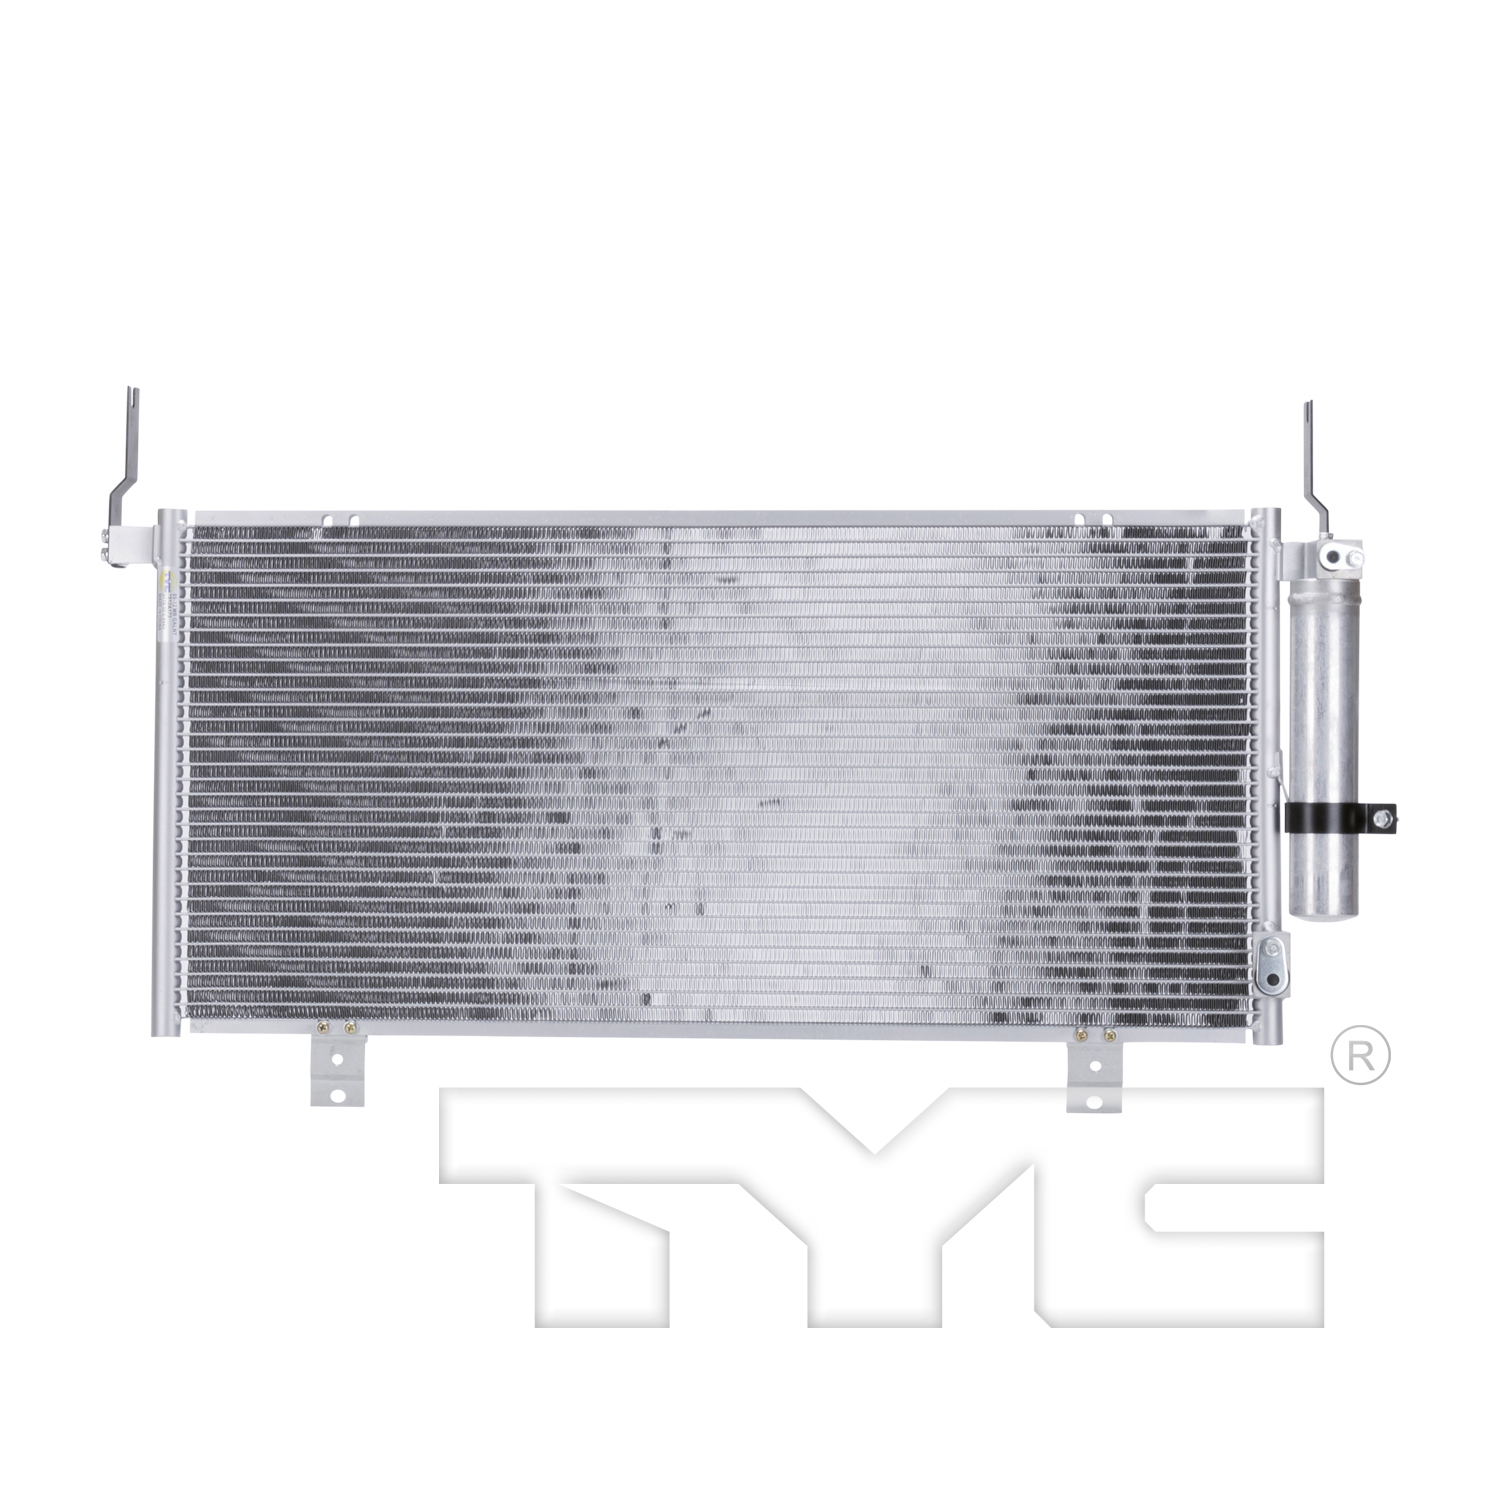 Aftermarket AC CONDENSERS for MITSUBISHI - GALANT, GALANT,09-12,Air conditioning condenser